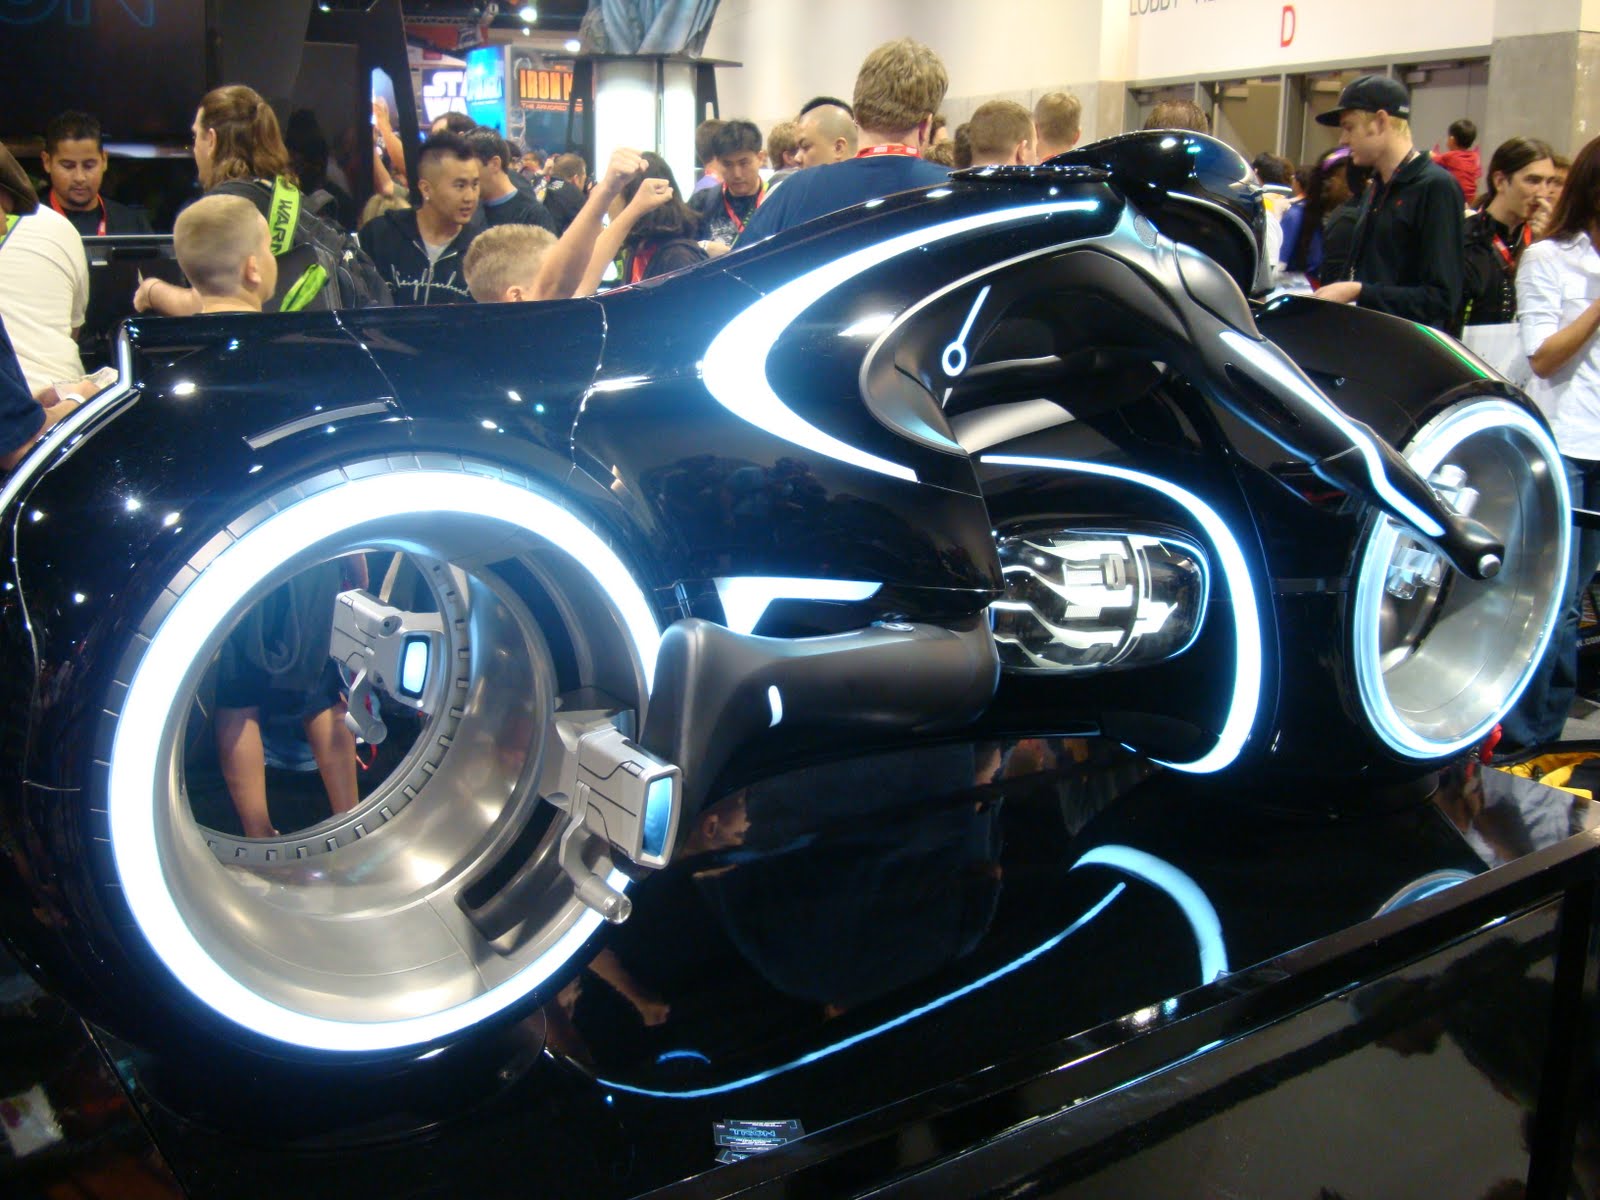 Motorcycle Madness Tron+Motorcycle